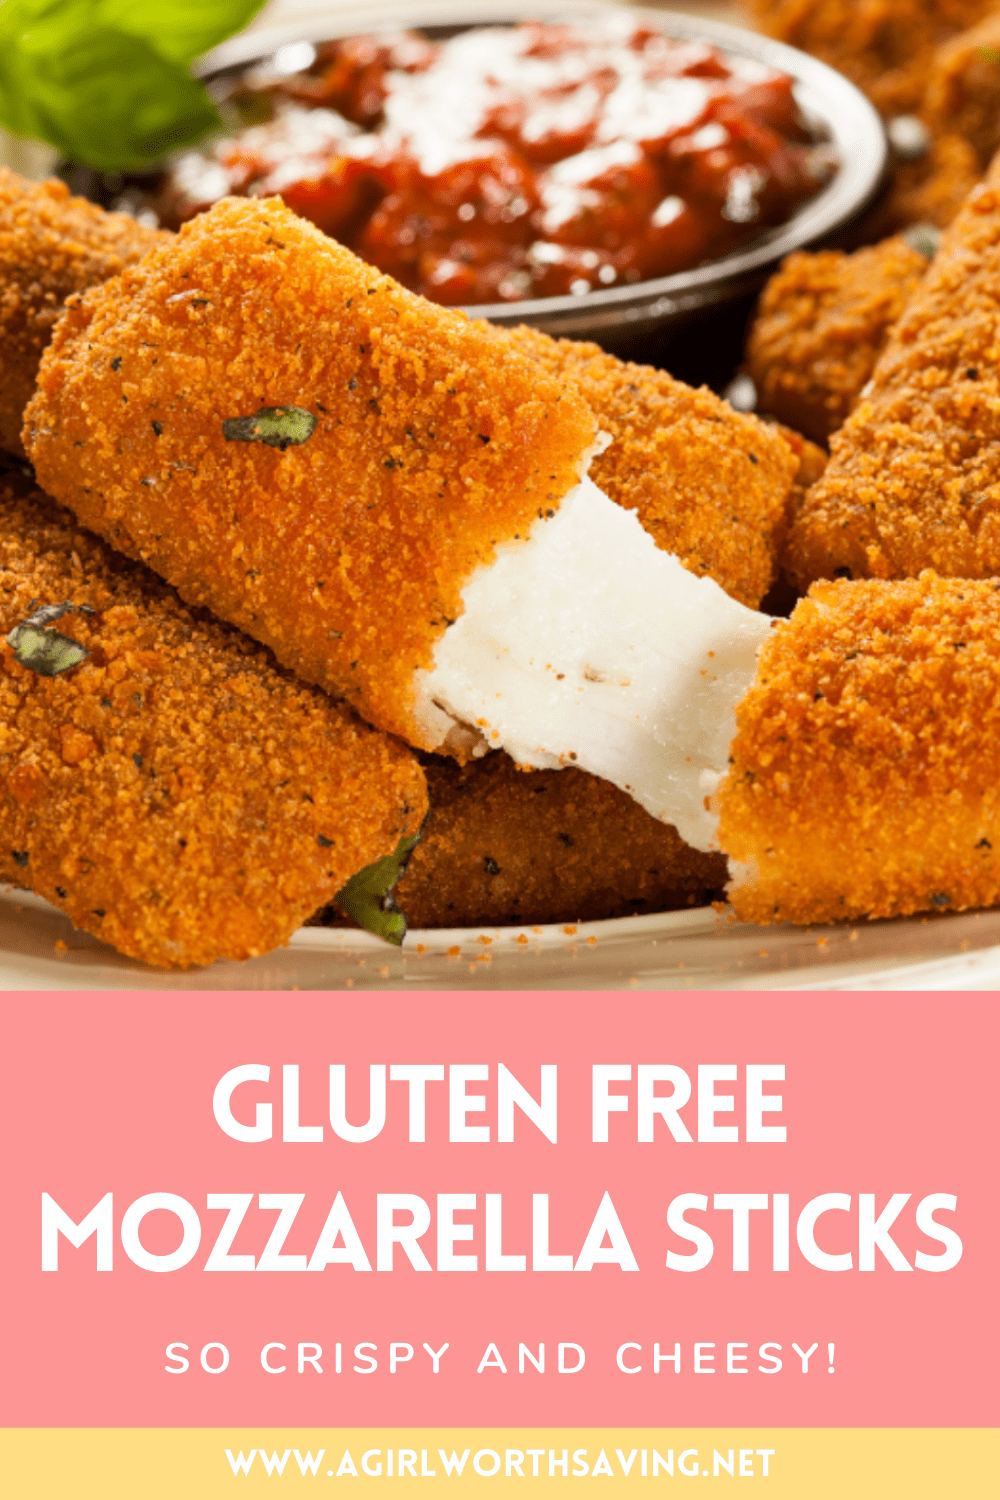 These gluten free mozzarella sticks are so cheesy and crispy, you'll have a hard time believing they're actually homemade!